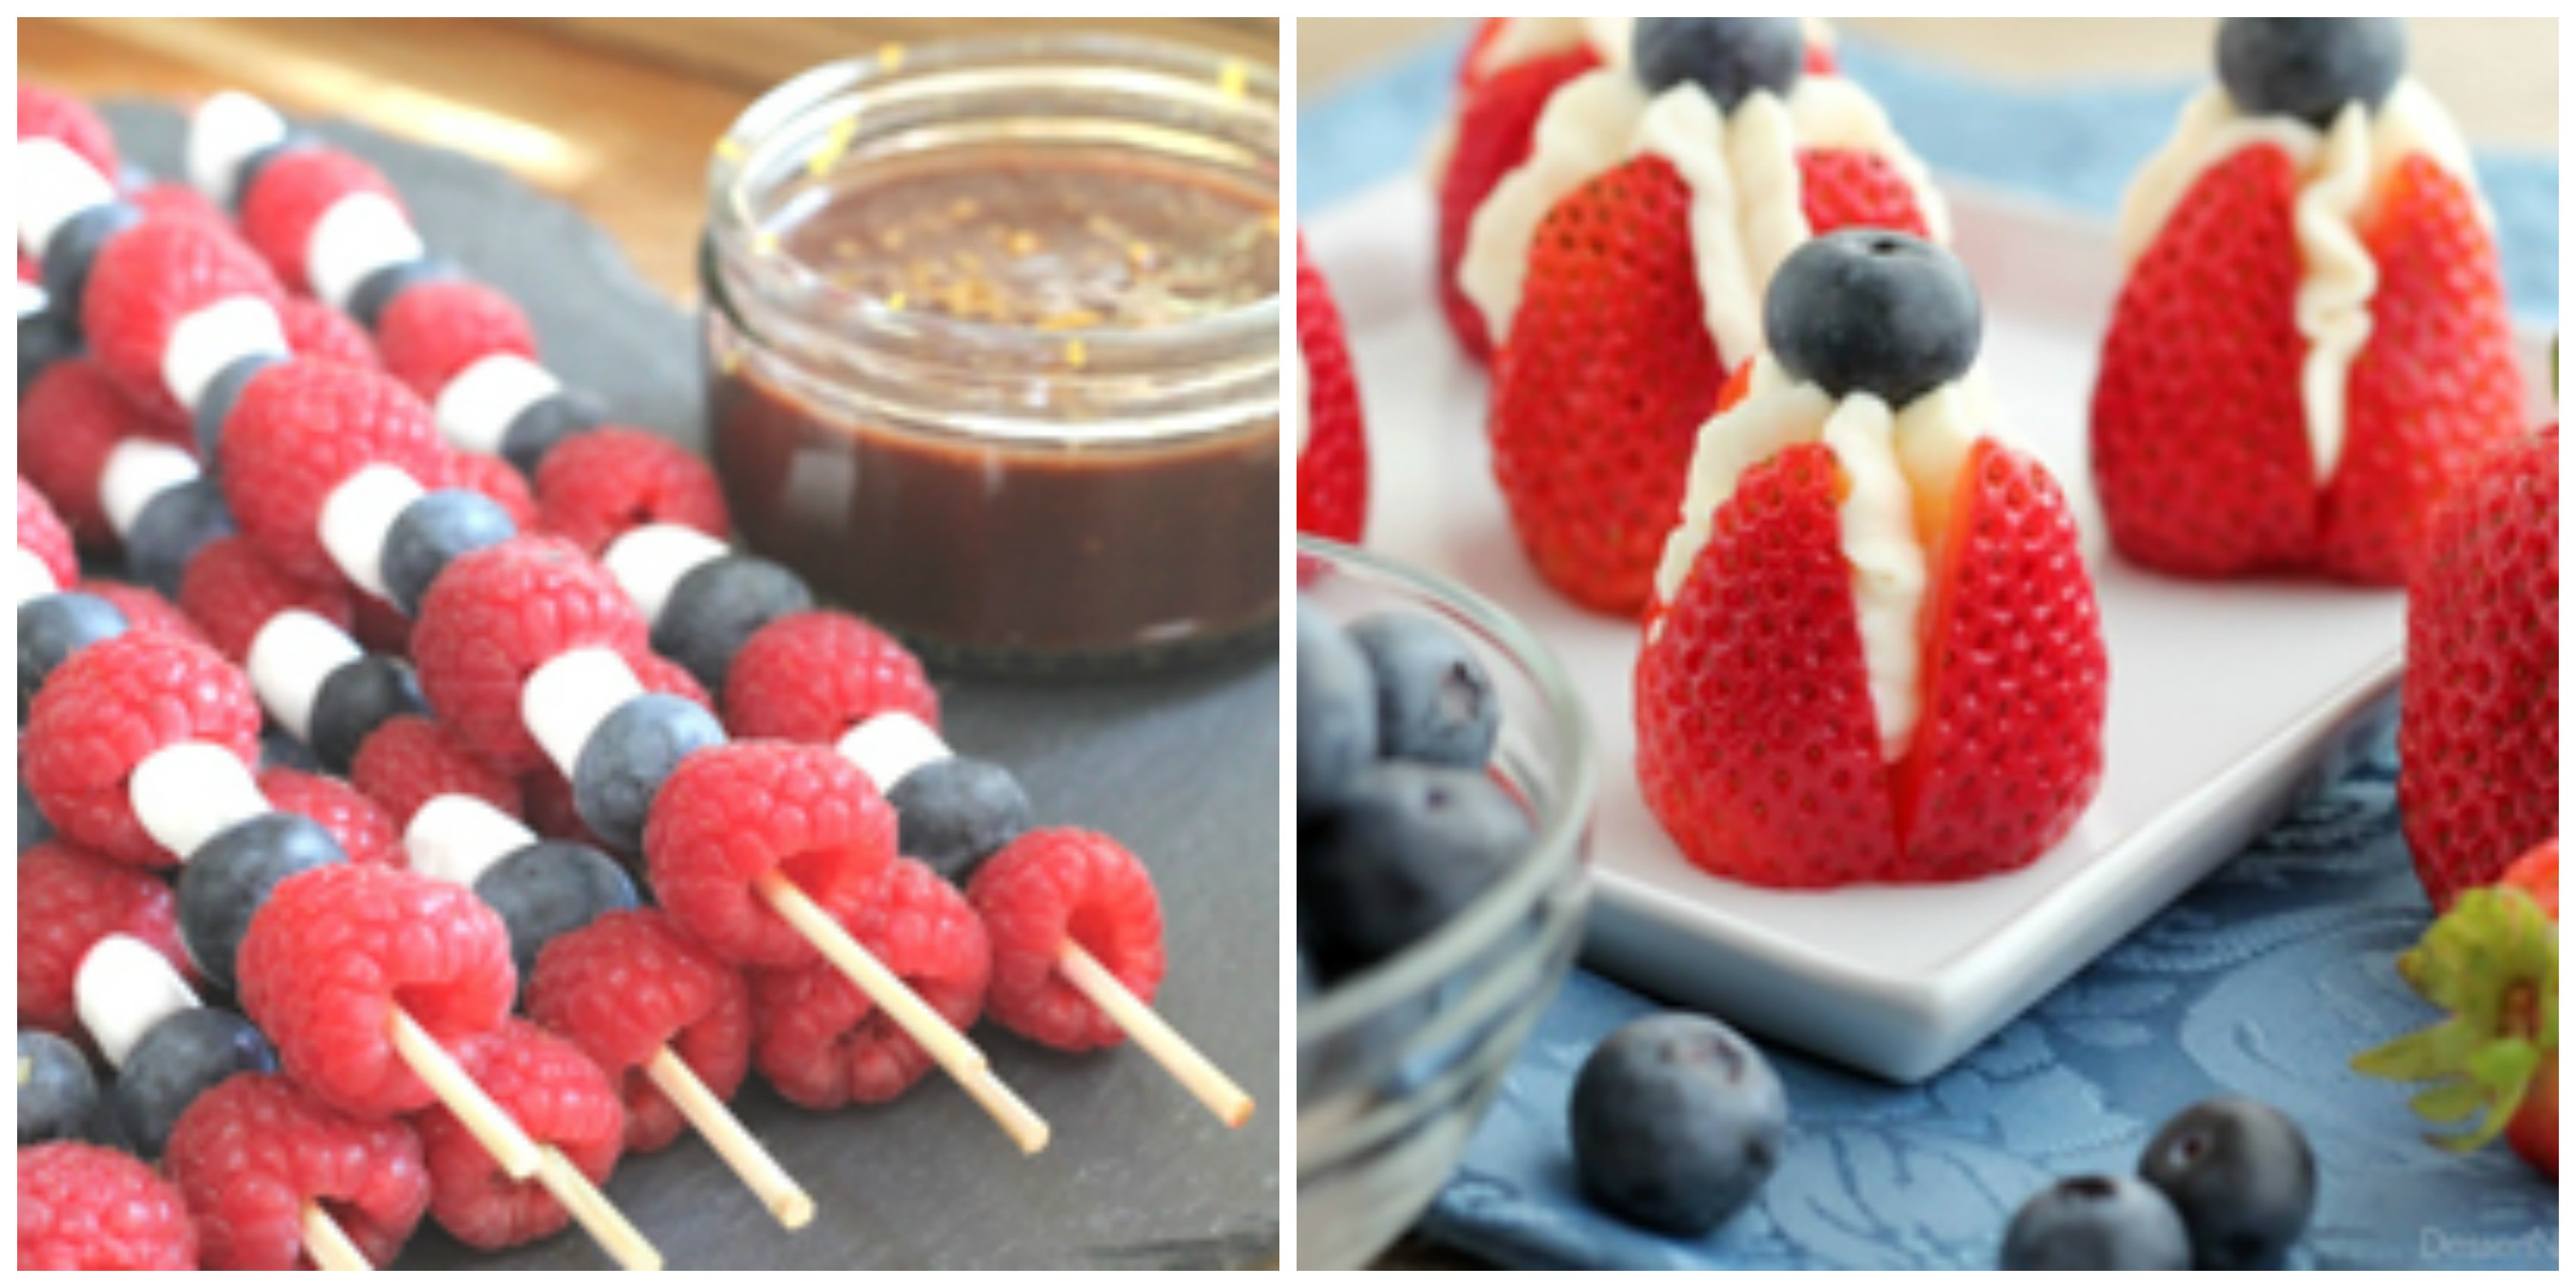 4Th Of July Dessert Ideas
 9 Healthy 4th of July Dessert Recipes